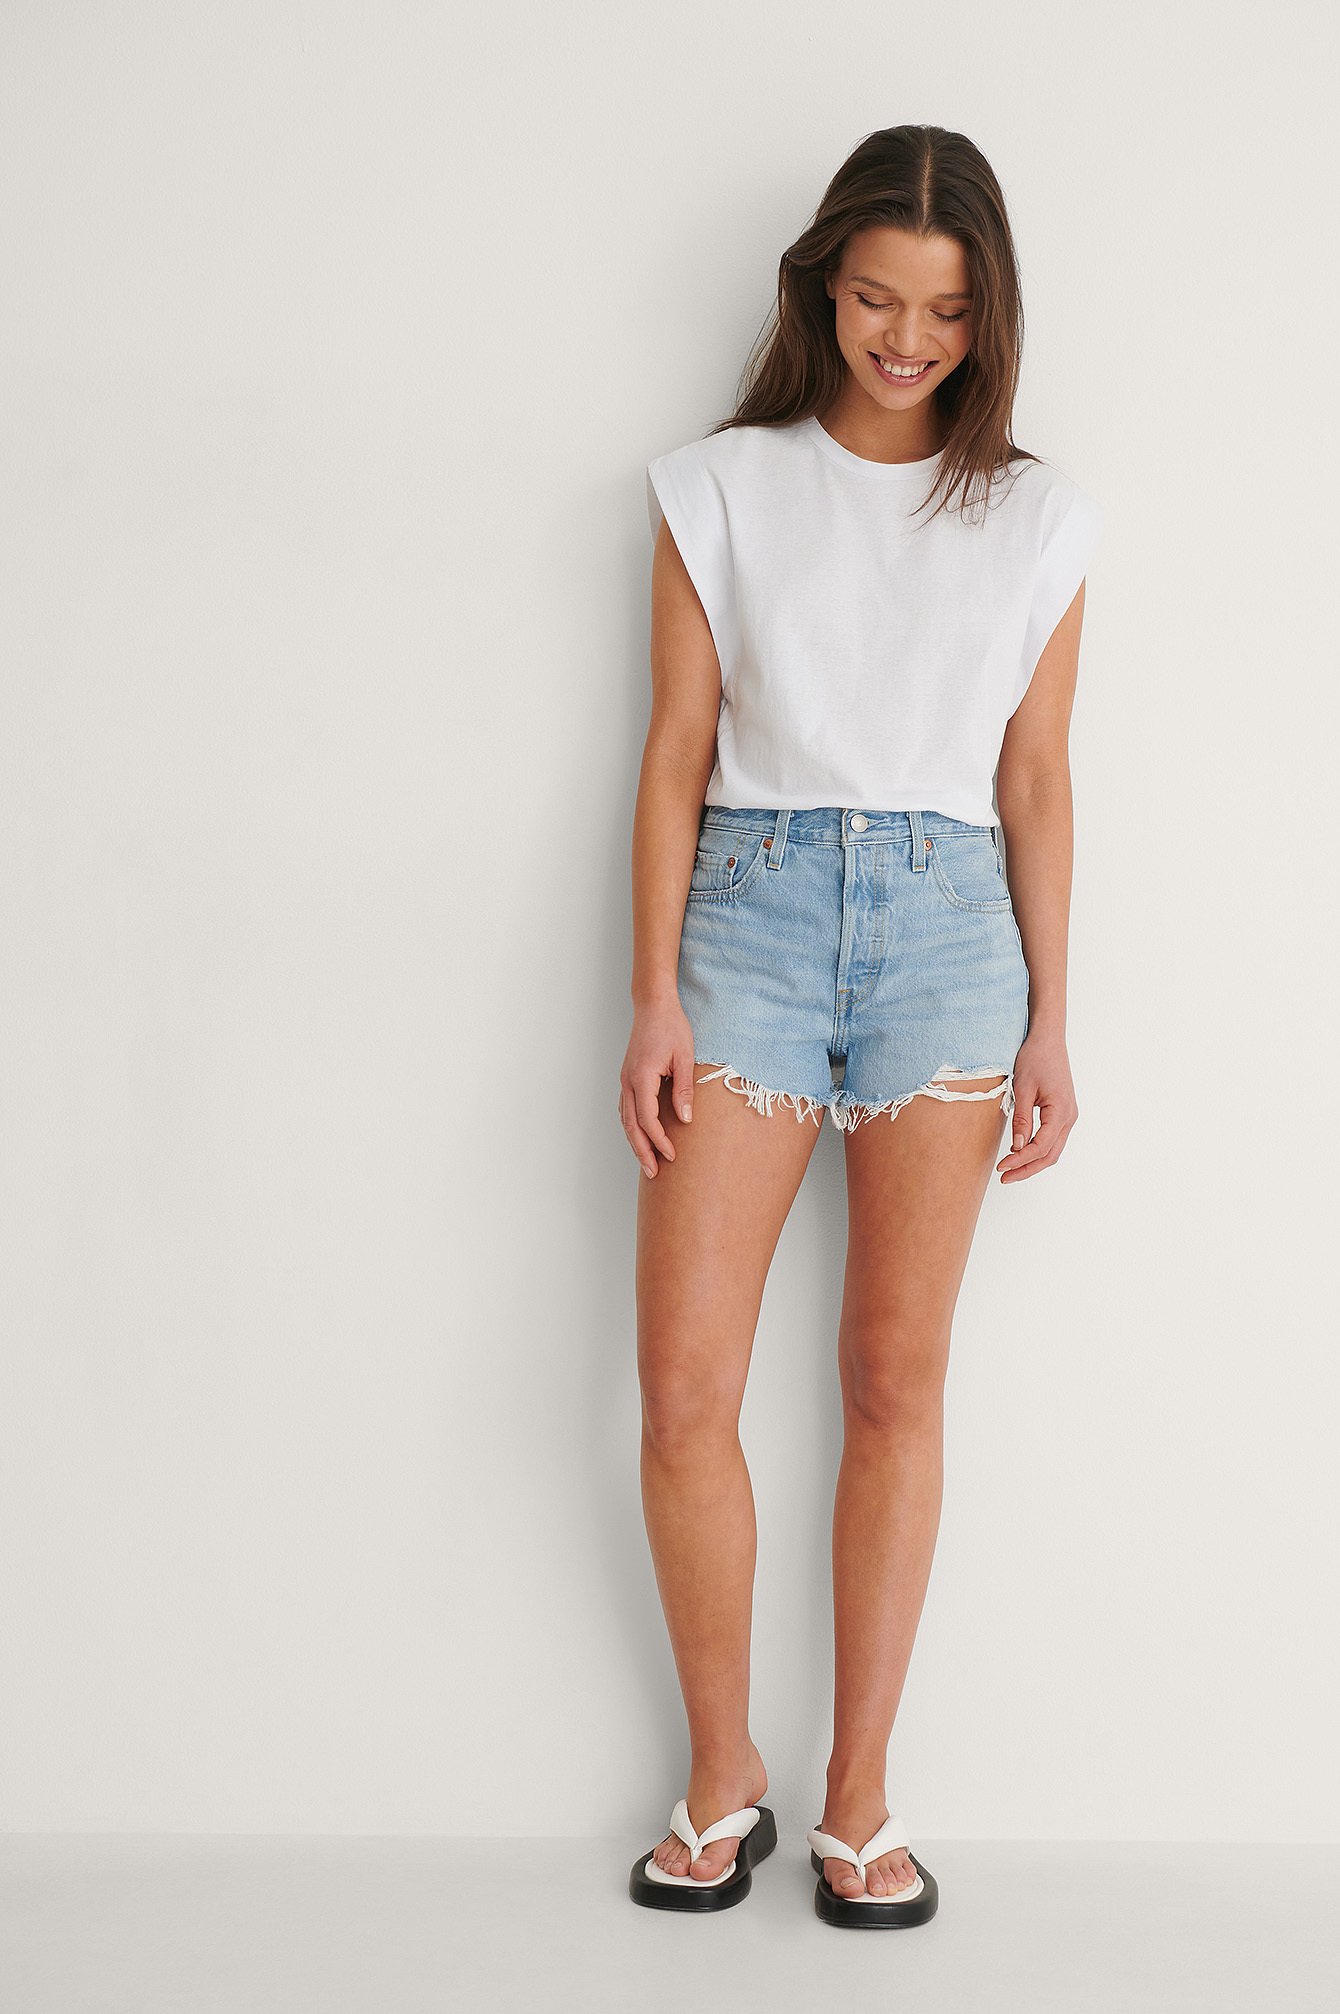 Levis 501 High Rise Shorts Outfit